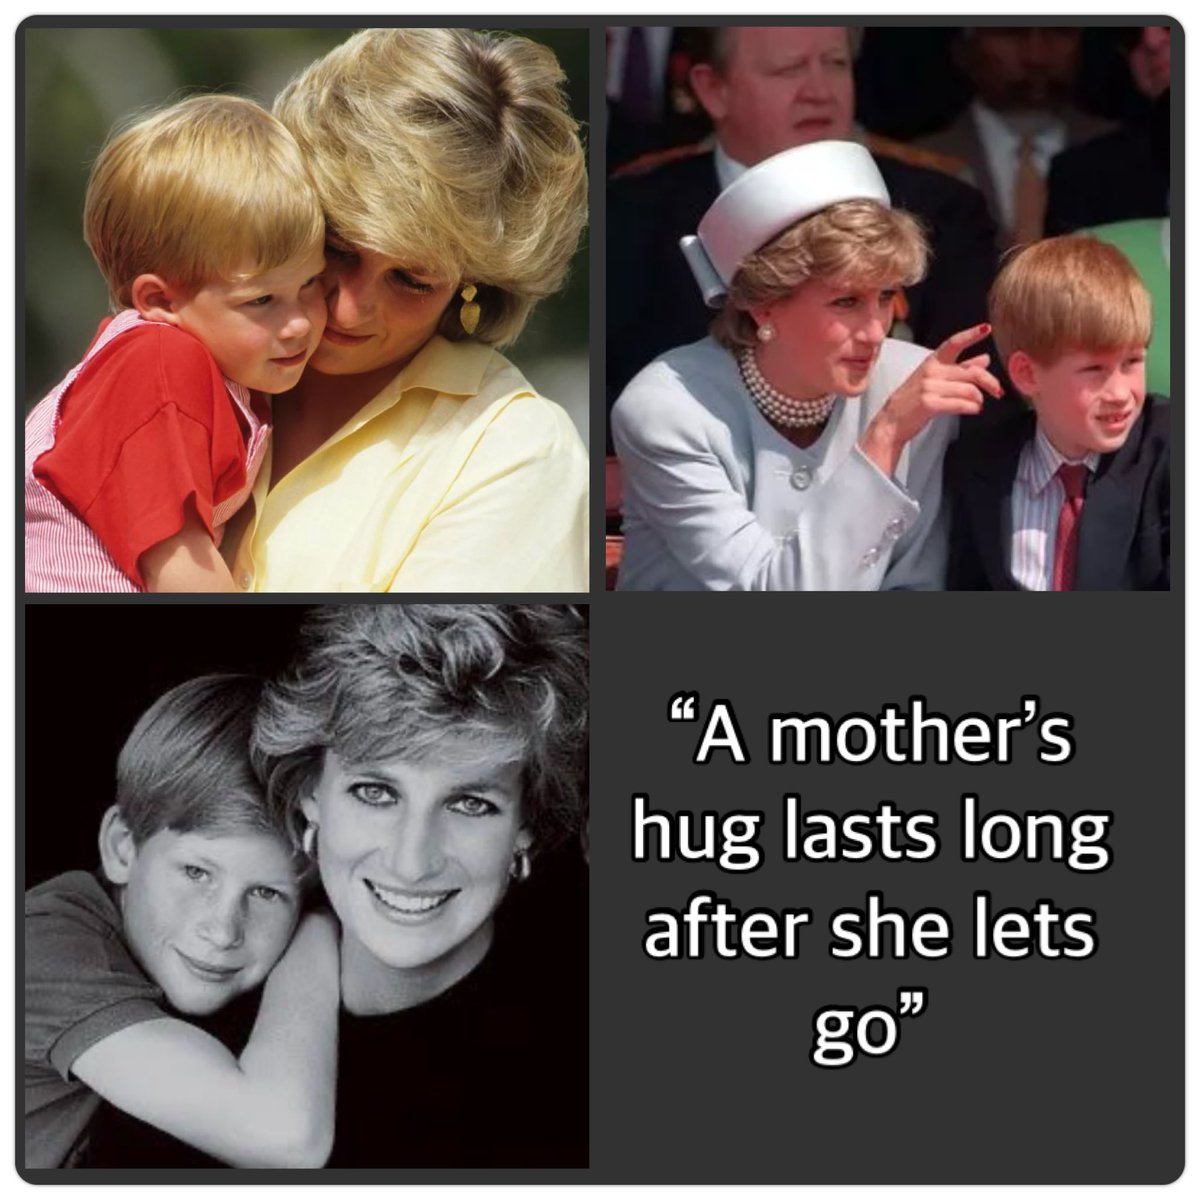 “All I want to do is make my mother incredibly proud.” (Prince Harry, 2016) 

Yes she is!😍💕

#SoulMates #QueenOfHearts #TruePrincessOfWales #LoveAlwaysWins #GoodKingHarry #HisMothersSon #PrinceHarryWon